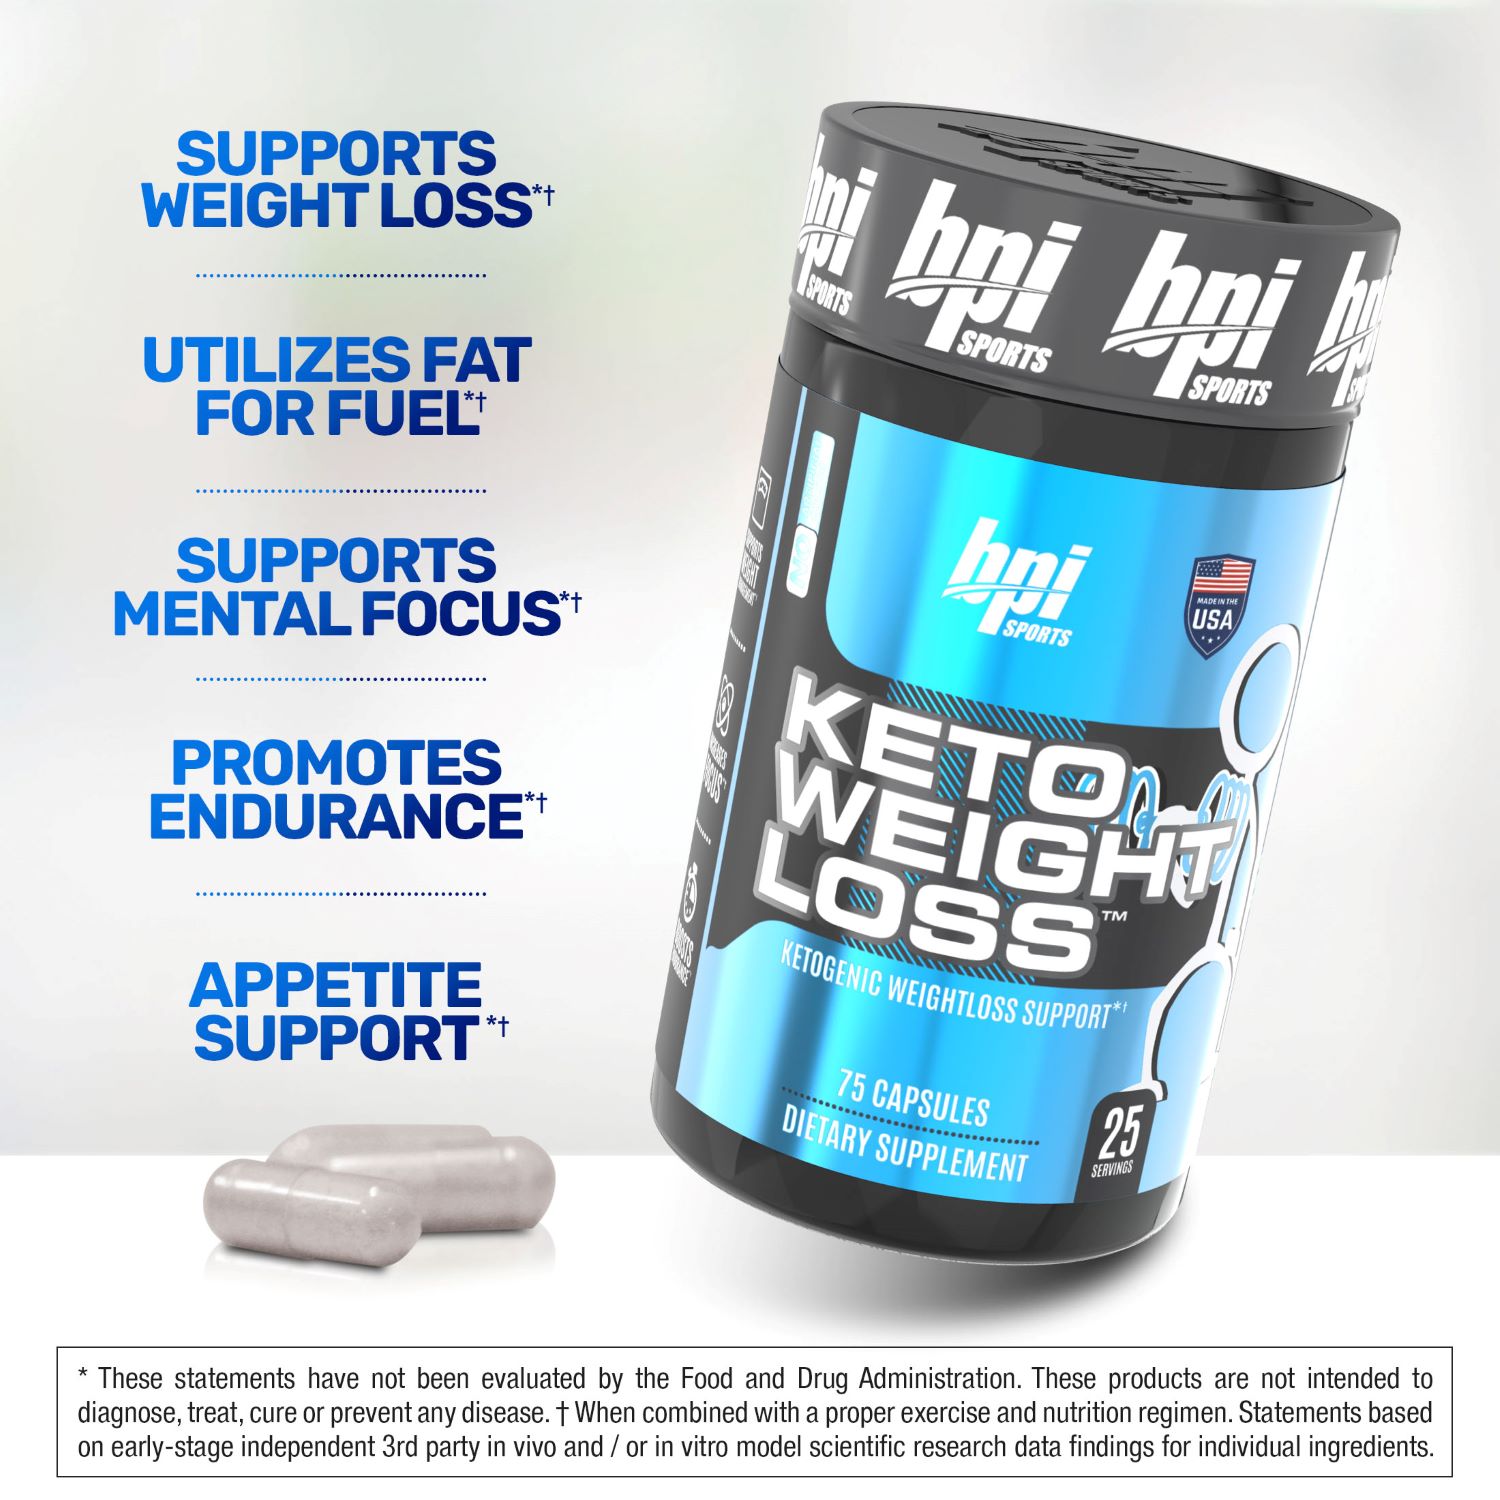 BPI Sports Keto Weight Loss Dietary Supplement, 75 Capsules - image 5 of 7